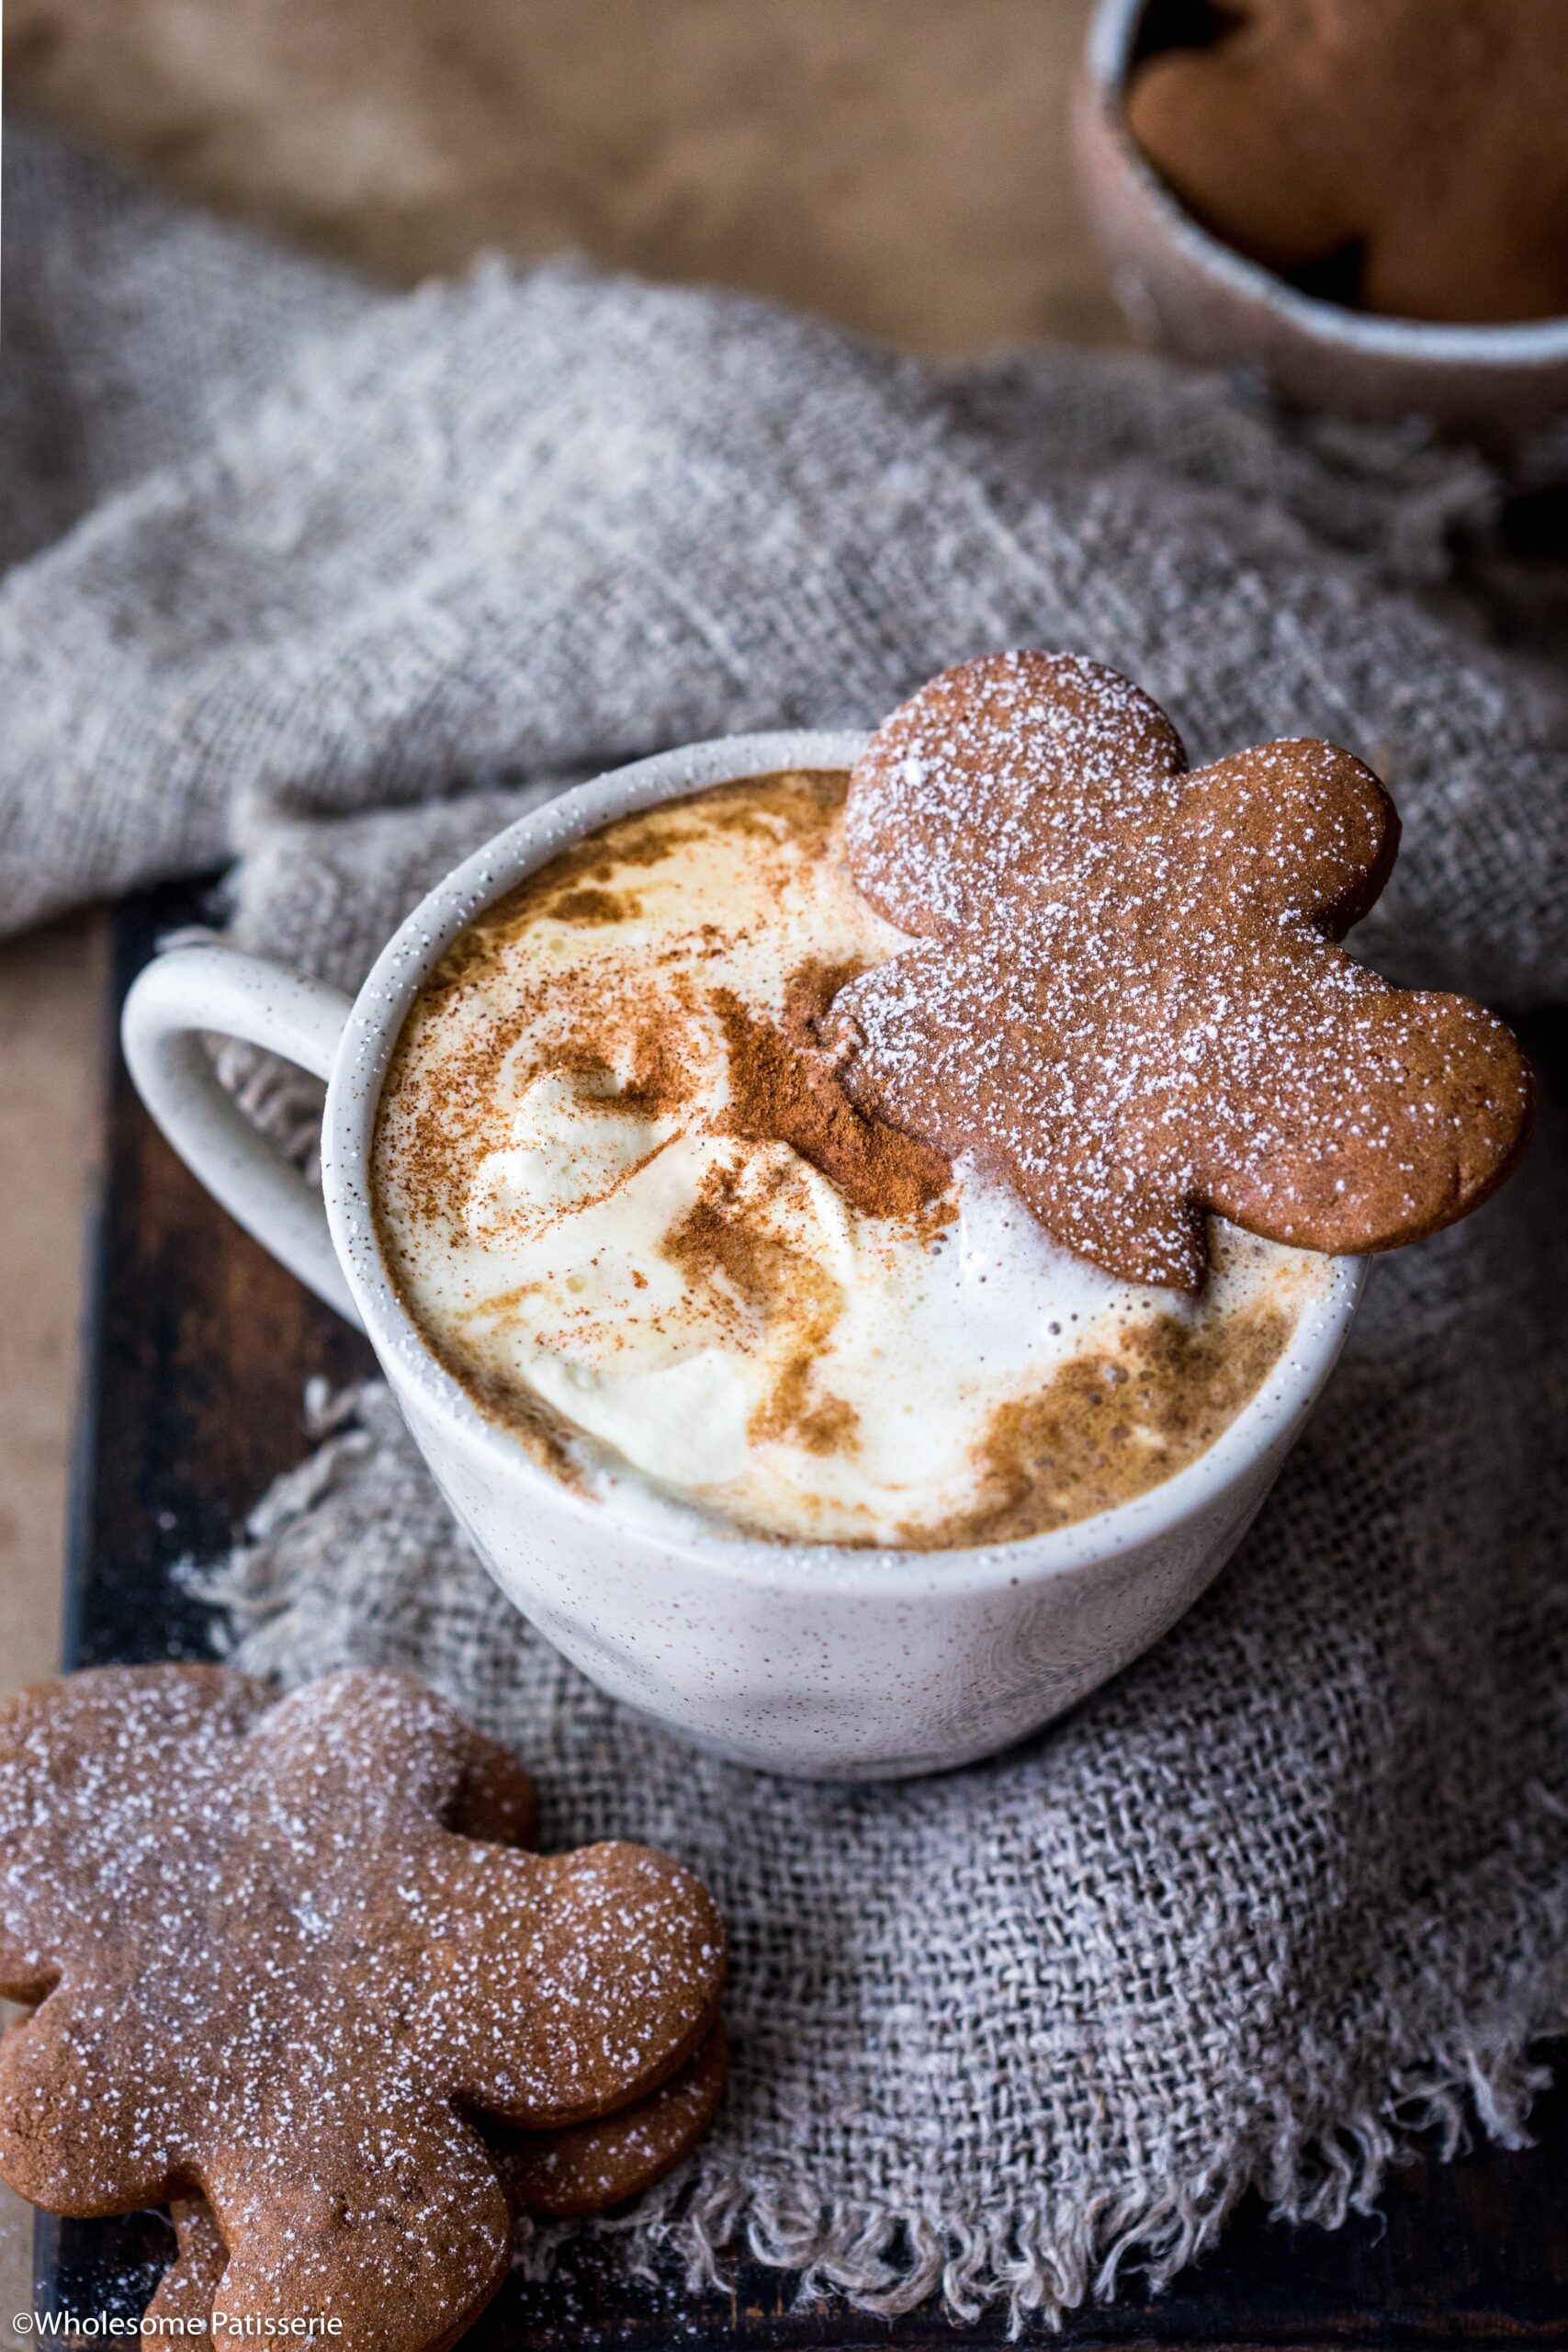  Nothing says the holiday season quite like the flavors of gingerbread and coffee combined.